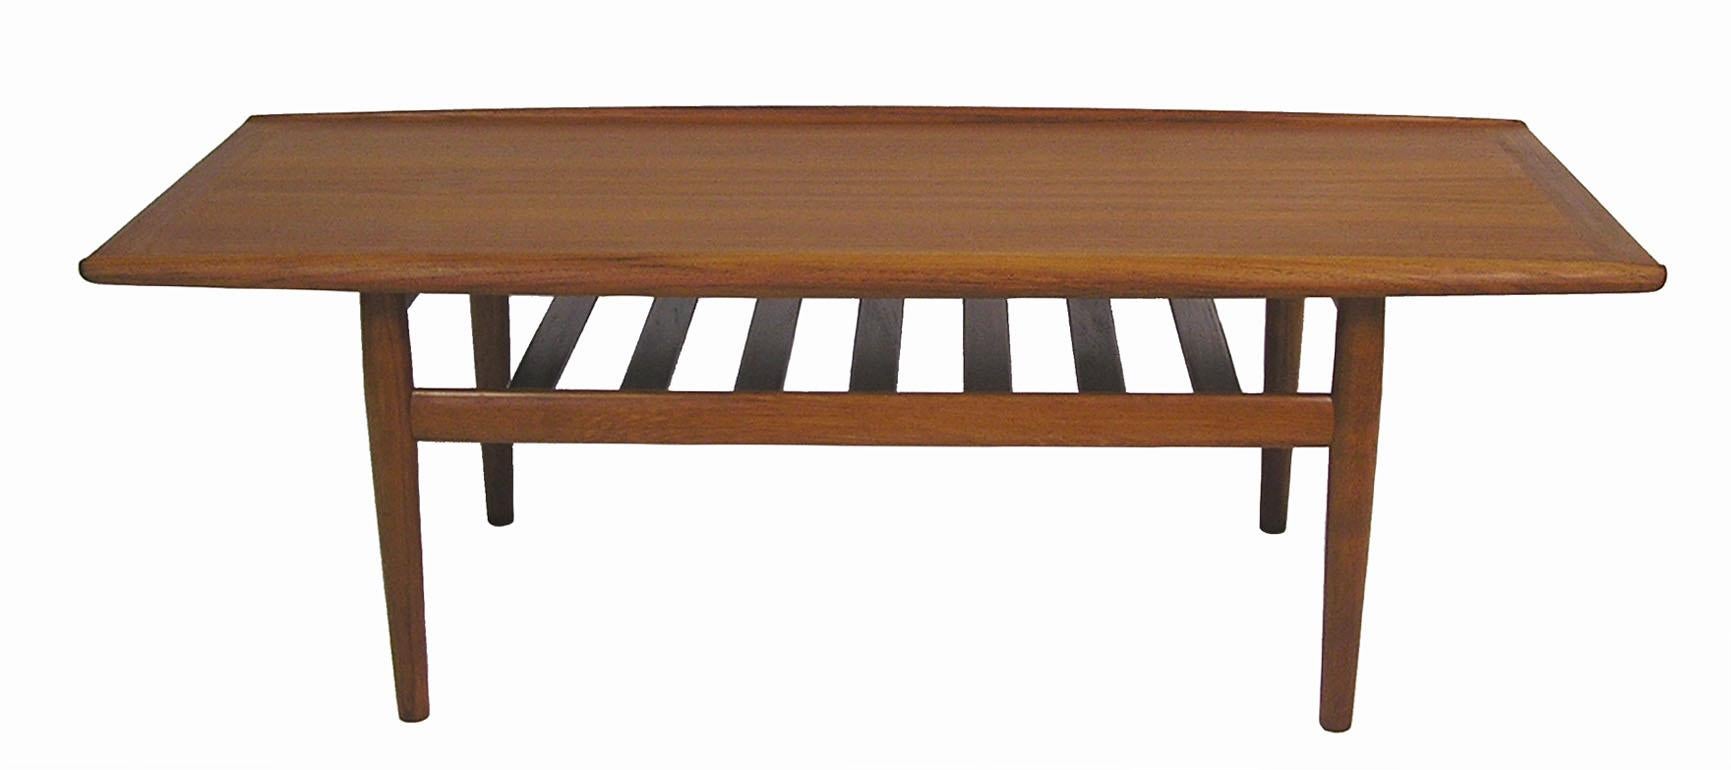 A gorgeous teak coffee table from the 1960s designed by Grete Jalk for Glostrup Mobelfabrik of Denmark. Beautiful craftsmanship throughout featuring a sculptured raised lip and slated lower shelf. Overall excellent condition with a newly refinished